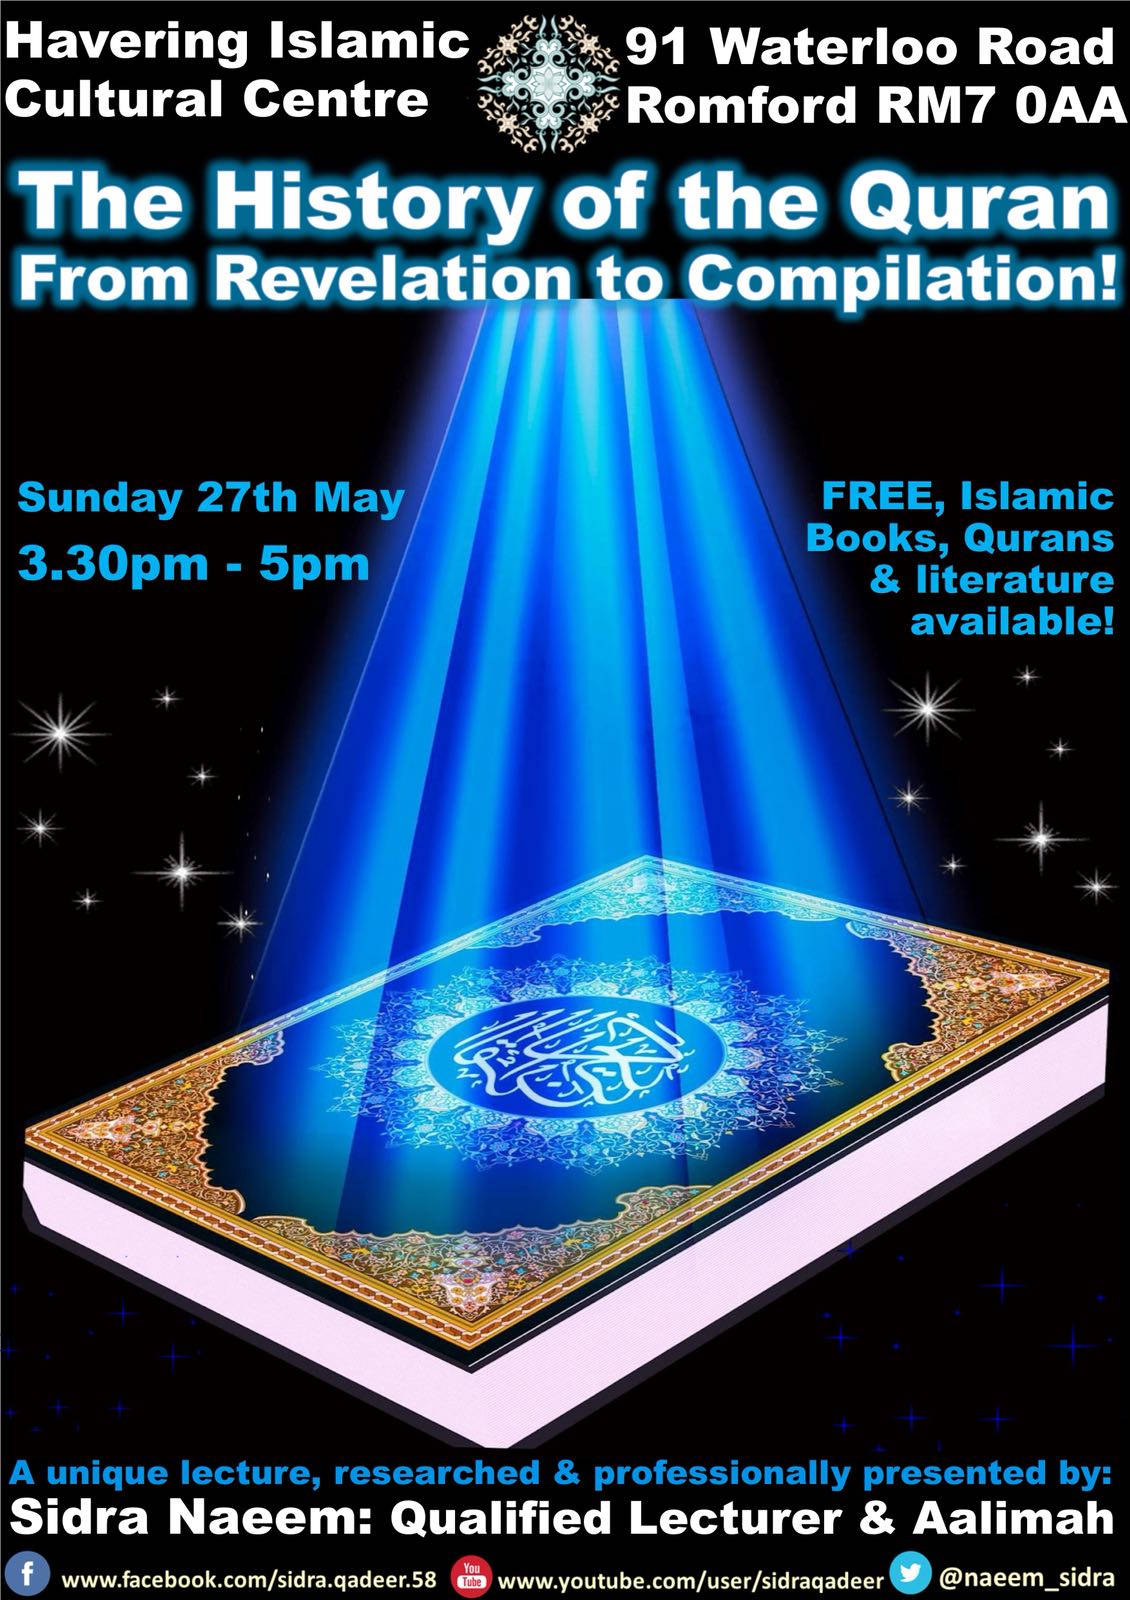 The history of the quranic text from revelation to compilation History Of The Qur An Revelation To Compilation Havering Islamic Cultural Centre